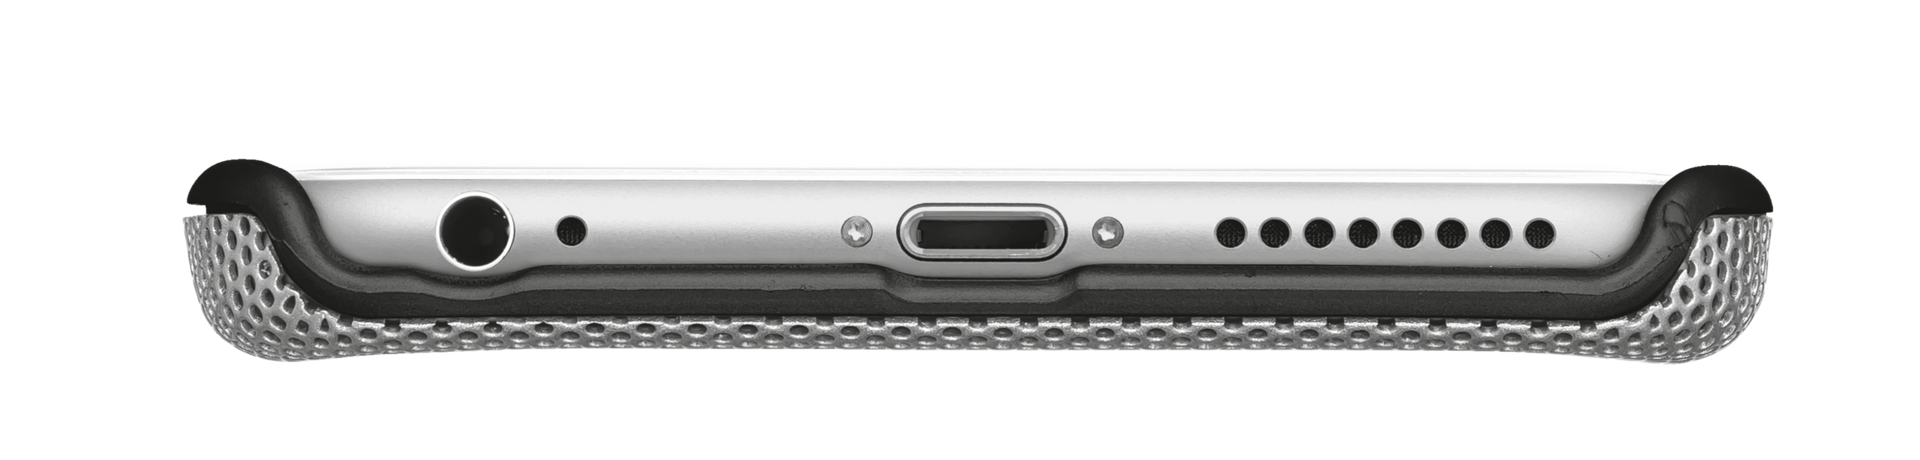 Endura Grip & Protection case for iPhone 6 Plus - silver-Bottom